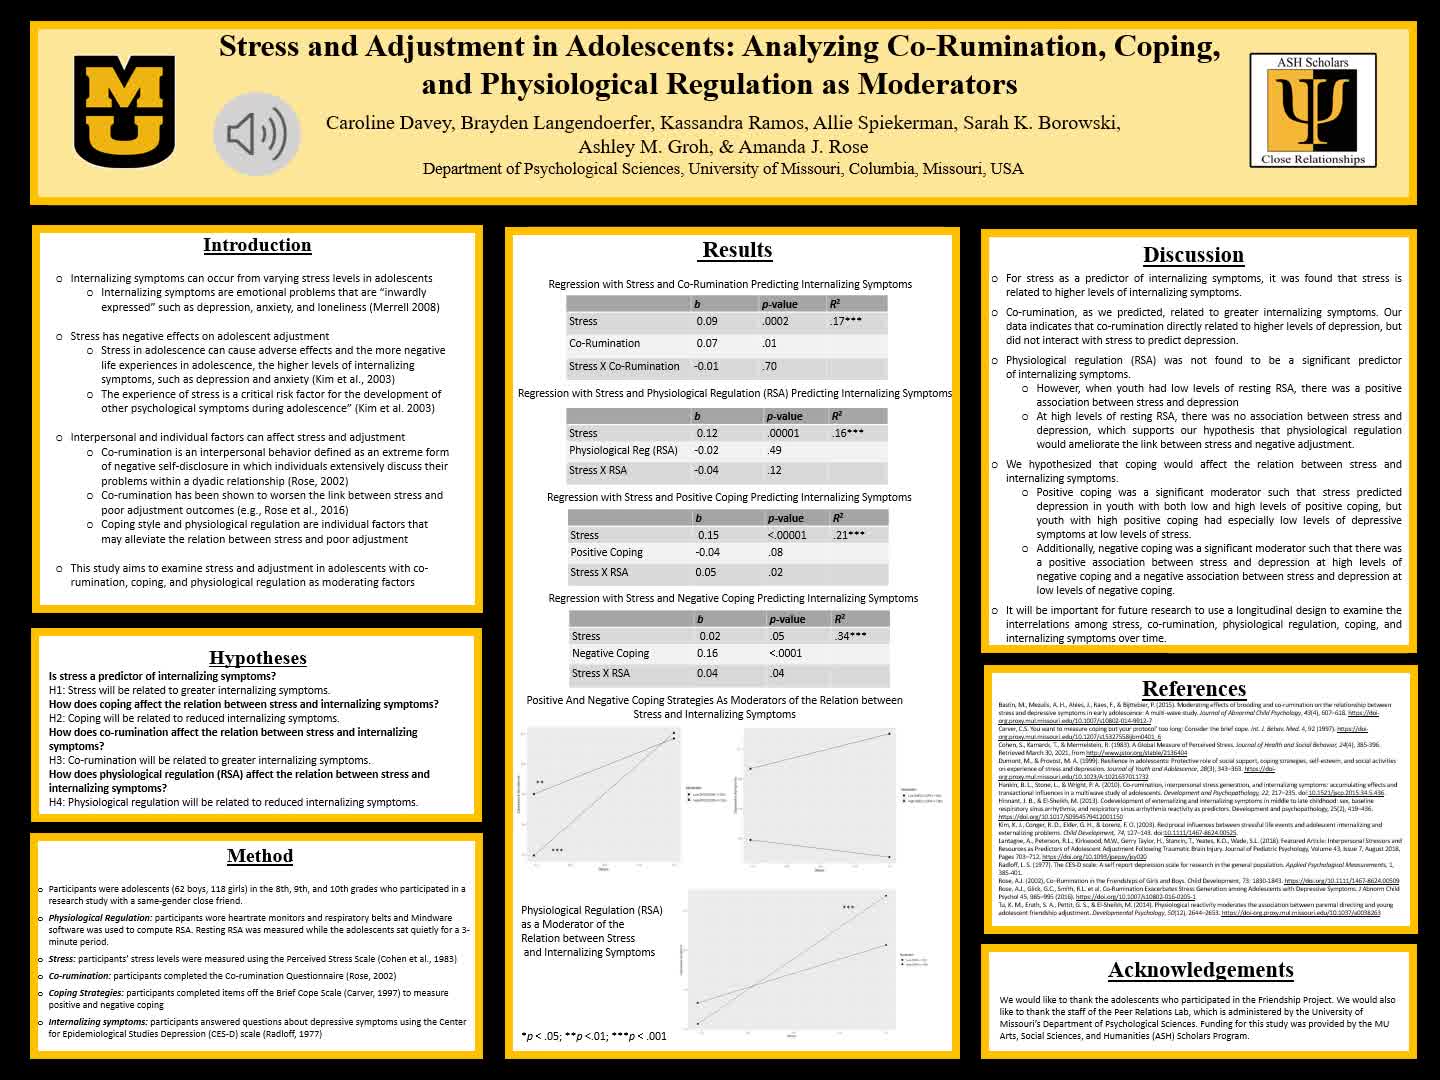 Langendoerfer: Stress and Adjustment in Adolescents: Analyzing Co-Rumination, Coping, and Physiological Regulation as Moderators